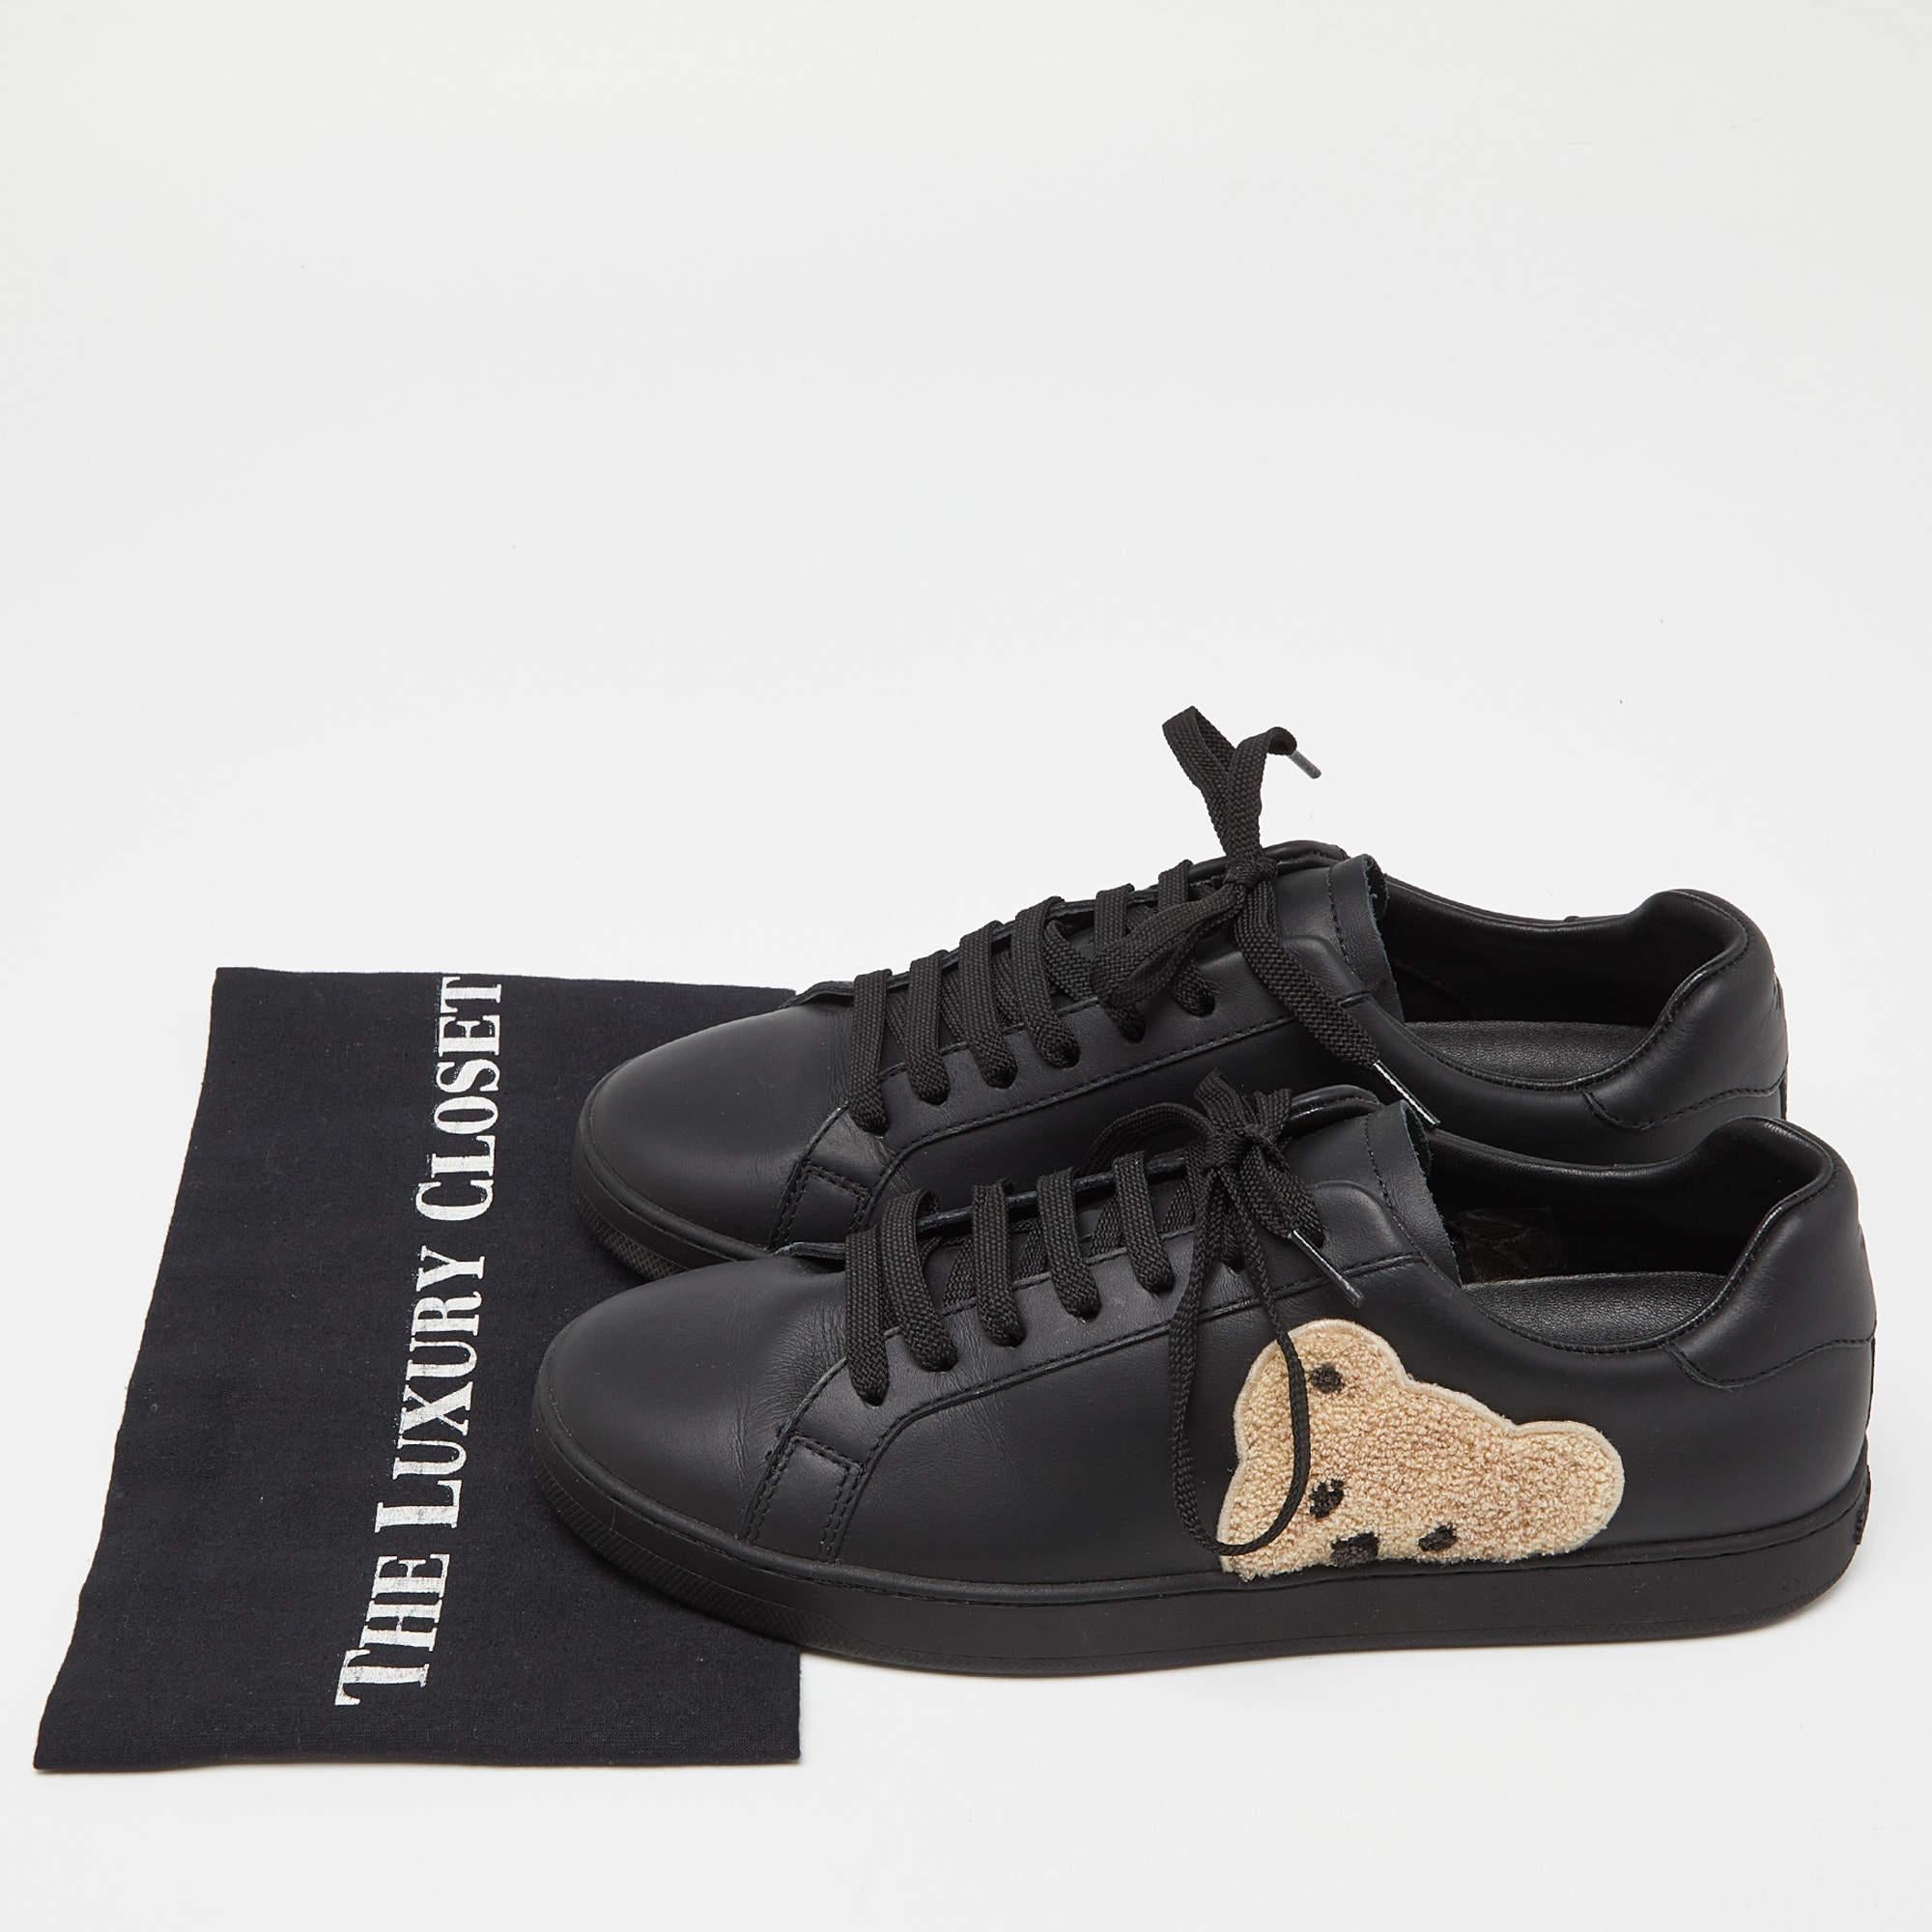 Palm Angels Black Leather Teddy Low Top Sneakers Size 42 For Sale 4